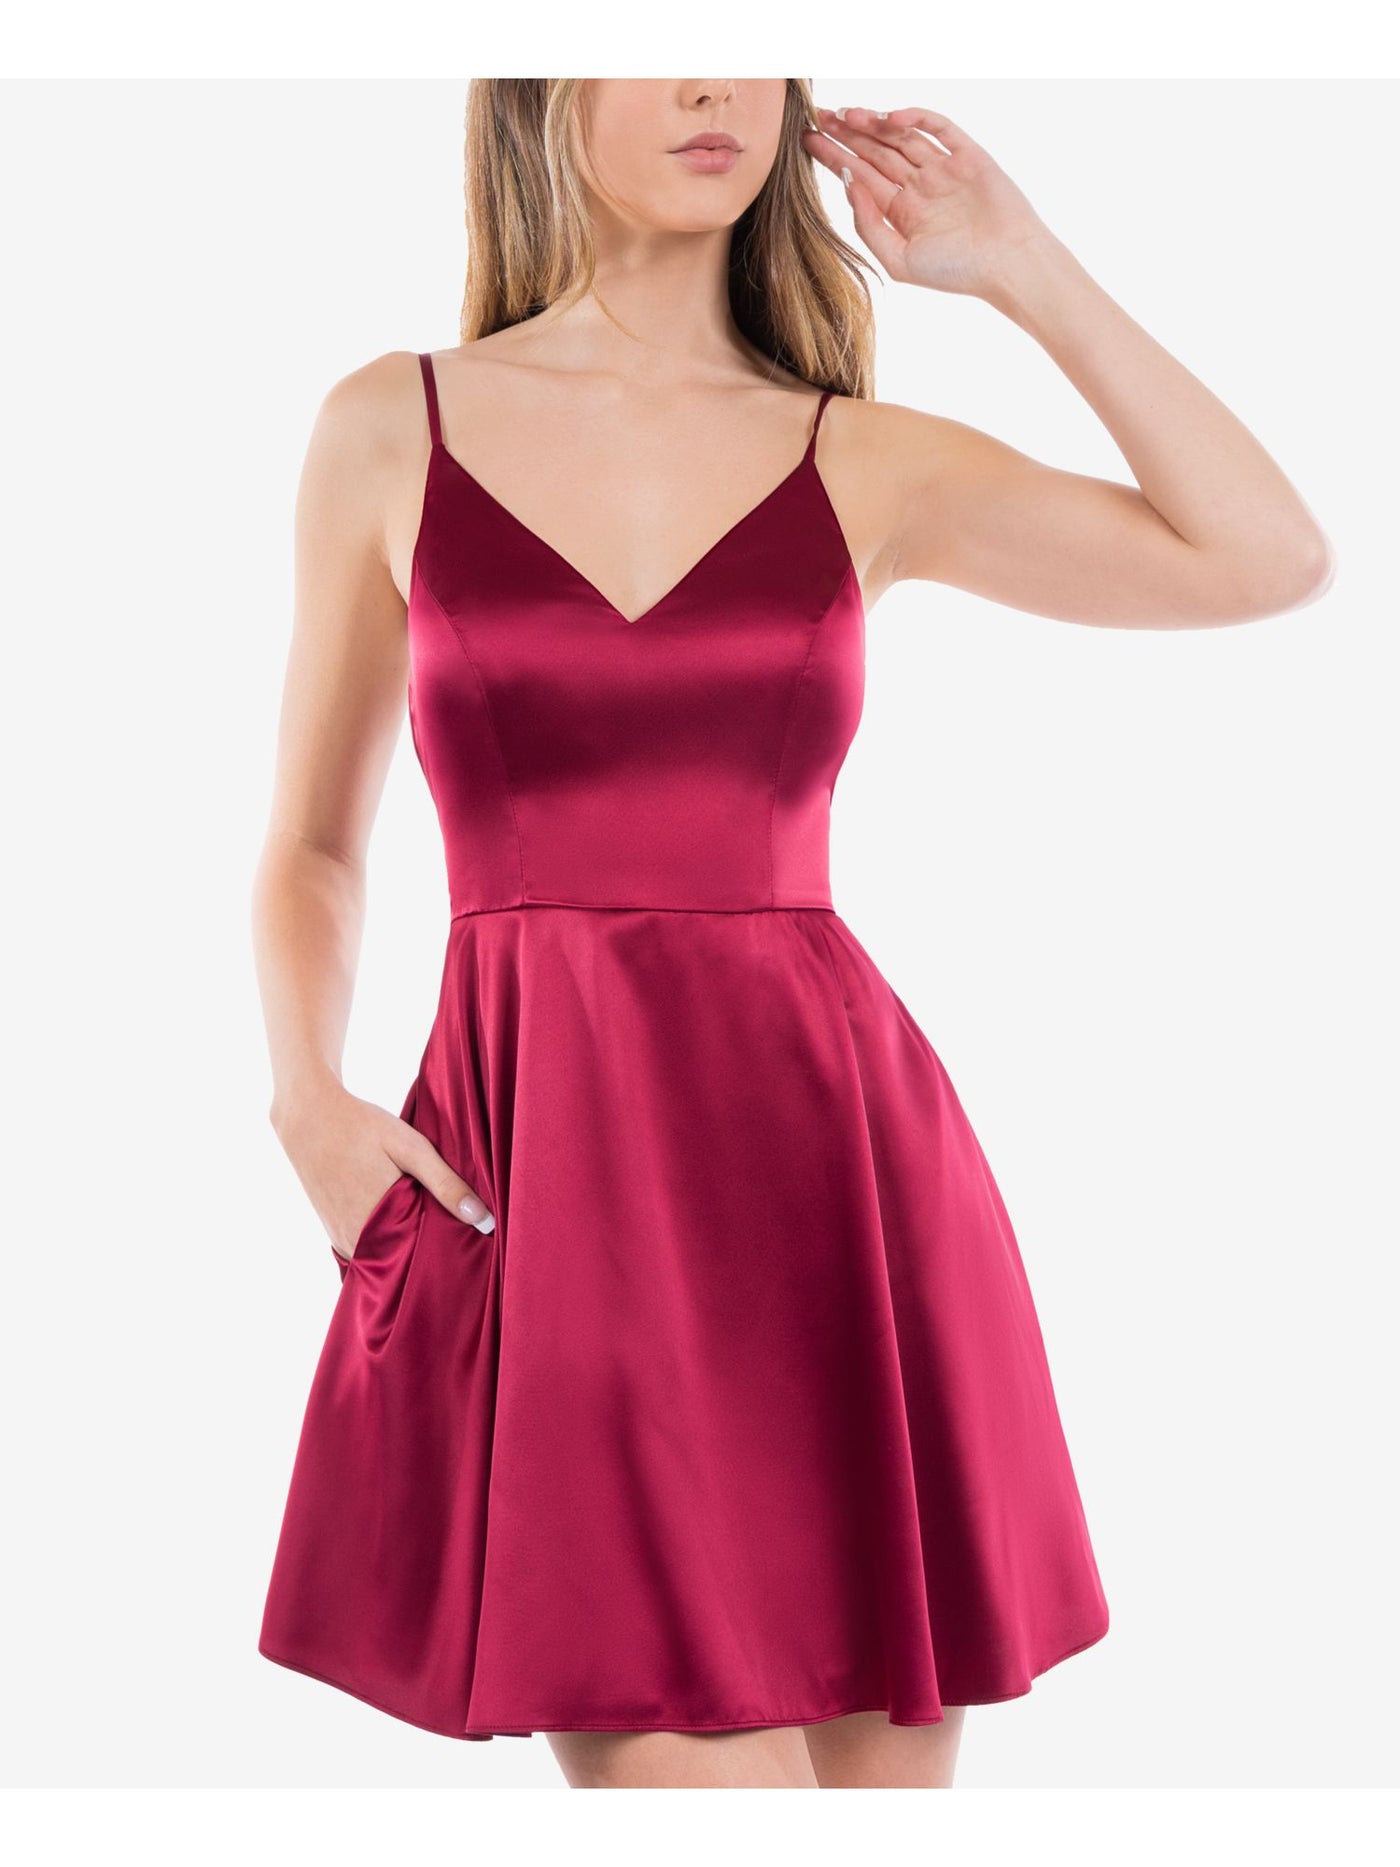 B DARLIN Womens Maroon Zippered Adjustable Padded Cups Pocketed Lined Spaghetti Strap V Neck Short Party Fit + Flare Dress Juniors 11\12